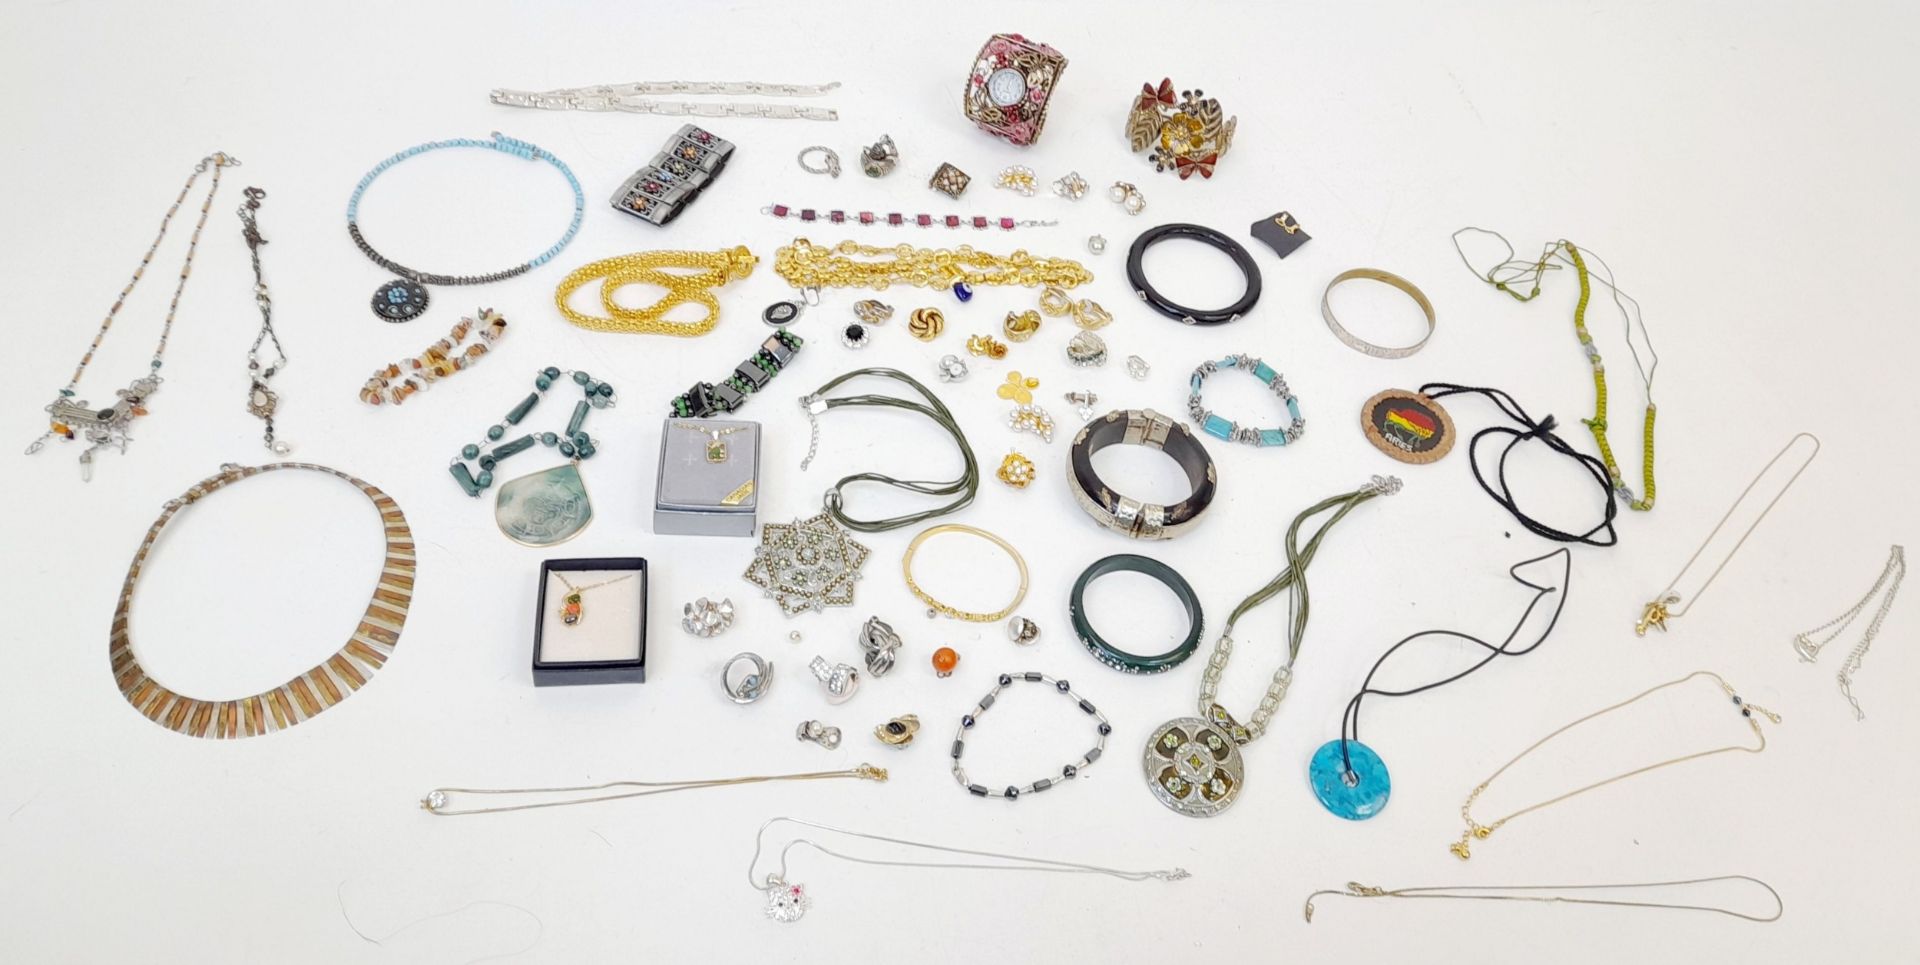 Over a Kilo of Wonderful Upmarket Costume Jewellery - Some really high-end pieces still in their